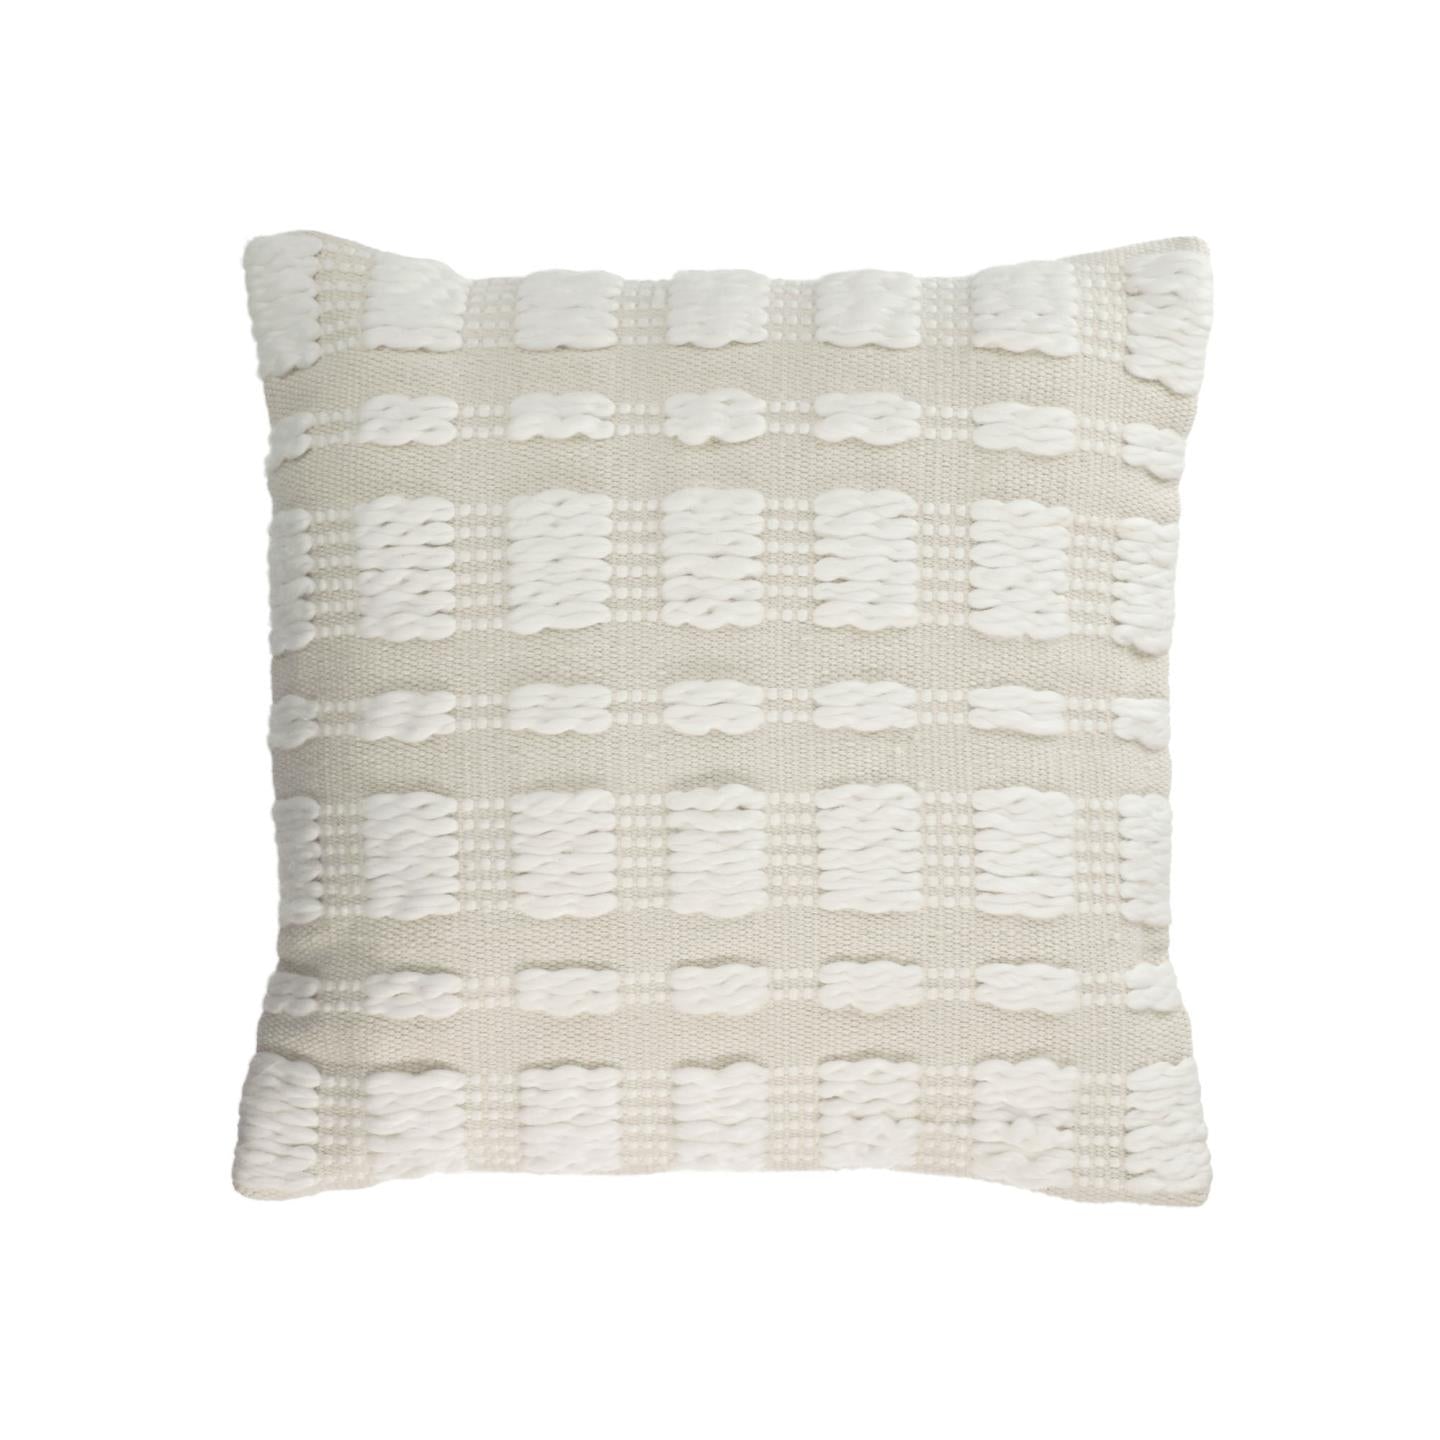 Aima cushion cover in beige and white, 45 x 45 cm